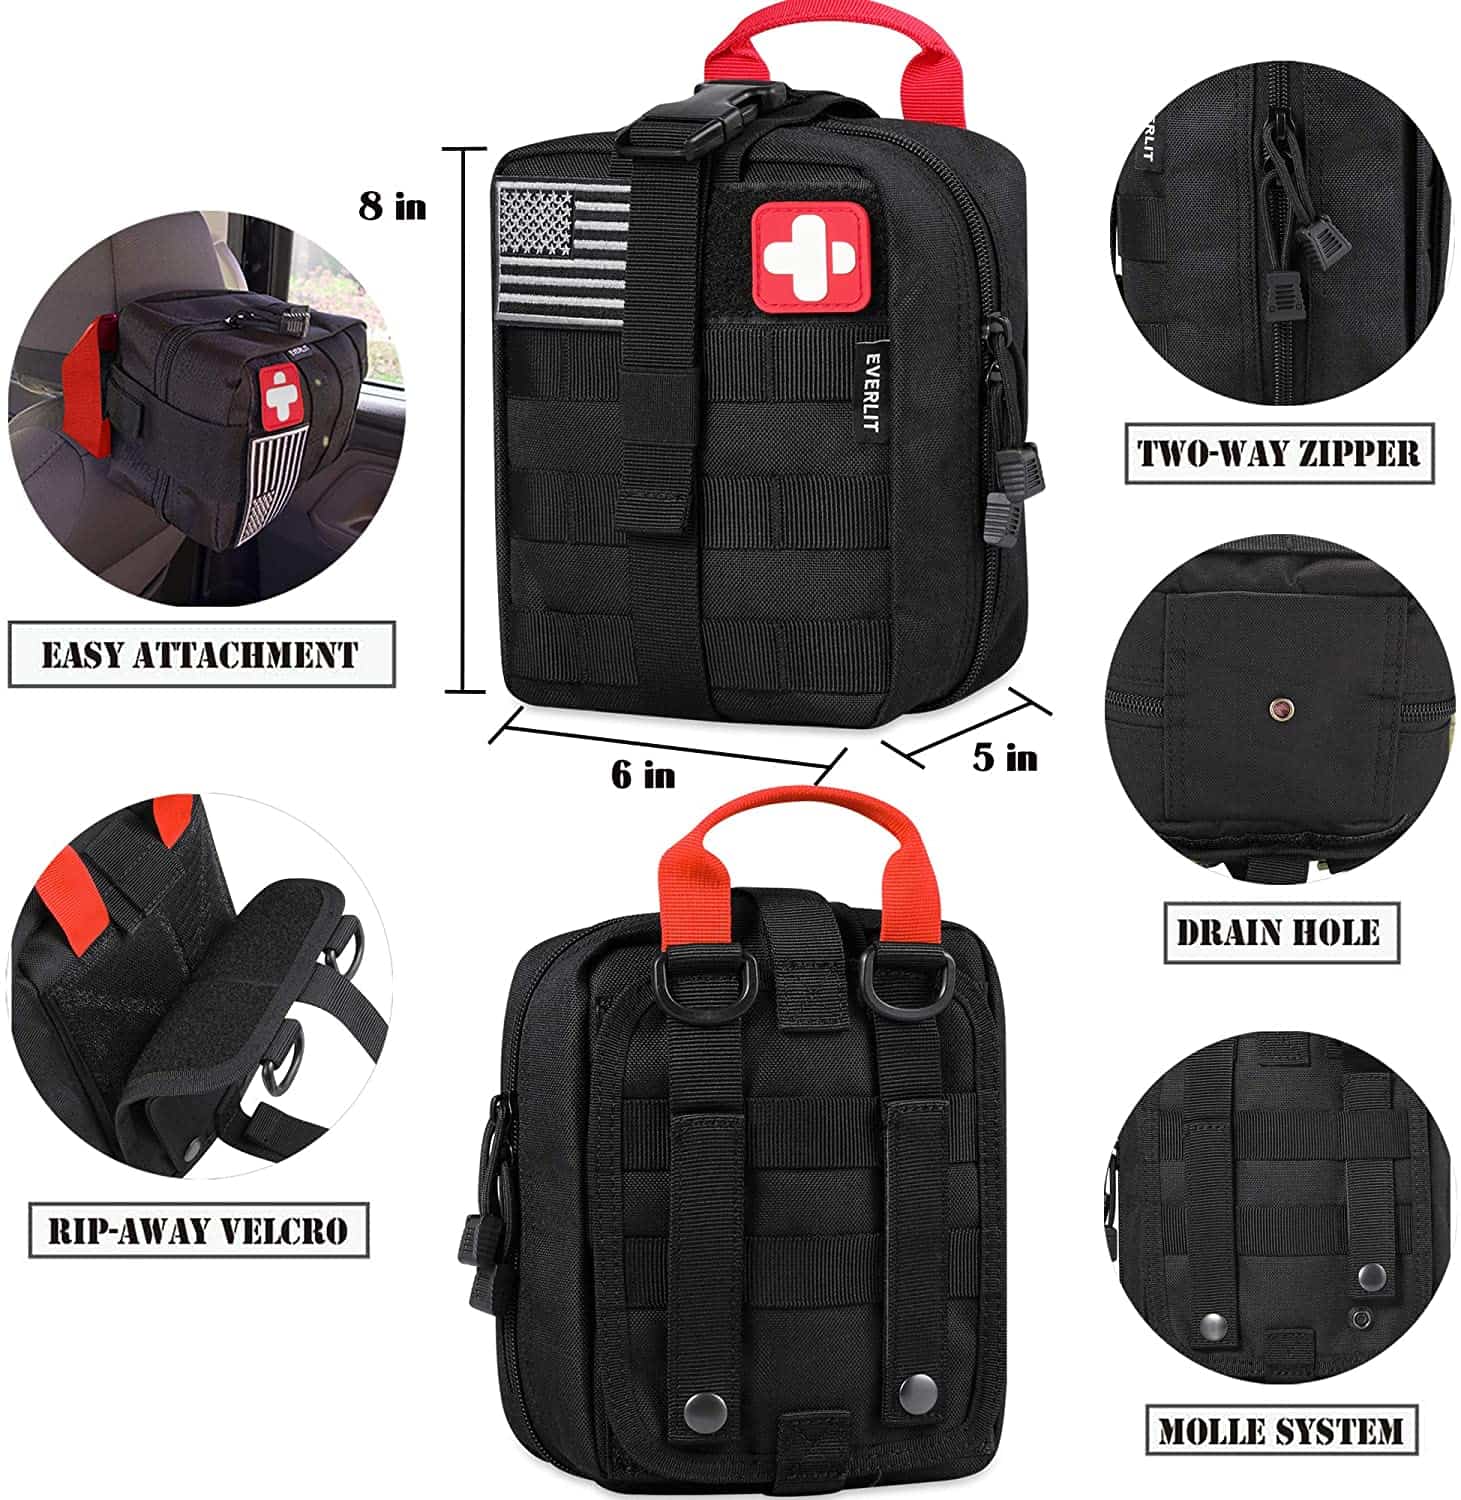 Black Survival First Aid Kit Contains Contains 250 Piece First Aid Kit - 2 